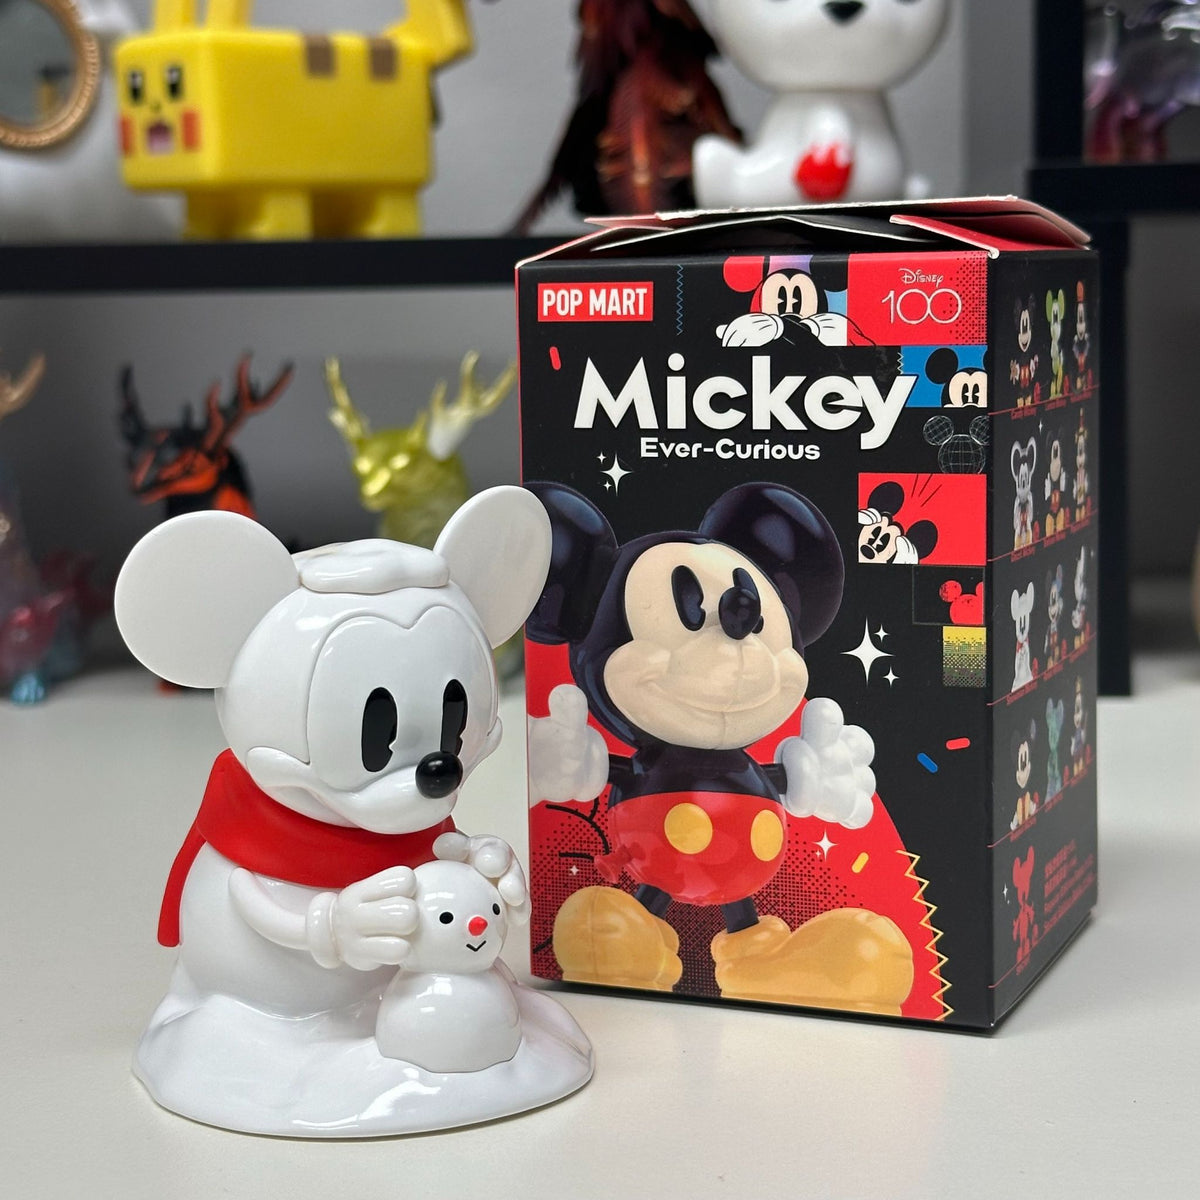 Mickey Ever-Curious Blind Box by POP MART - Snowman Mickey - 1